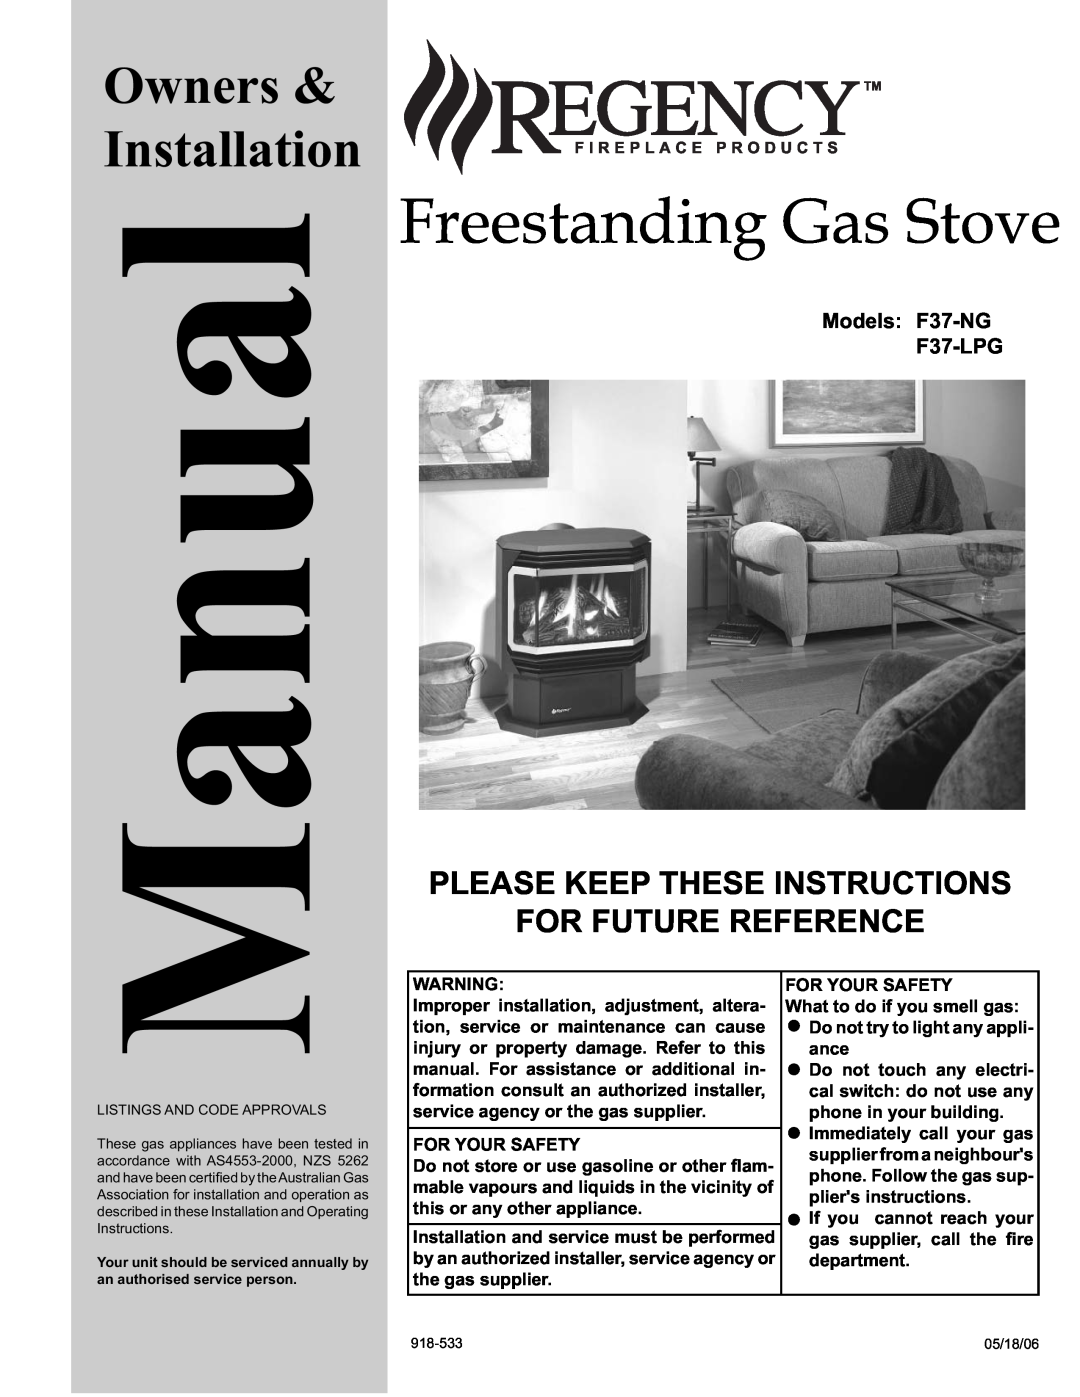 Regency installation manual Please Keep These Instructions, For Future Reference, Models F37-NG F37-LPG, Manual 